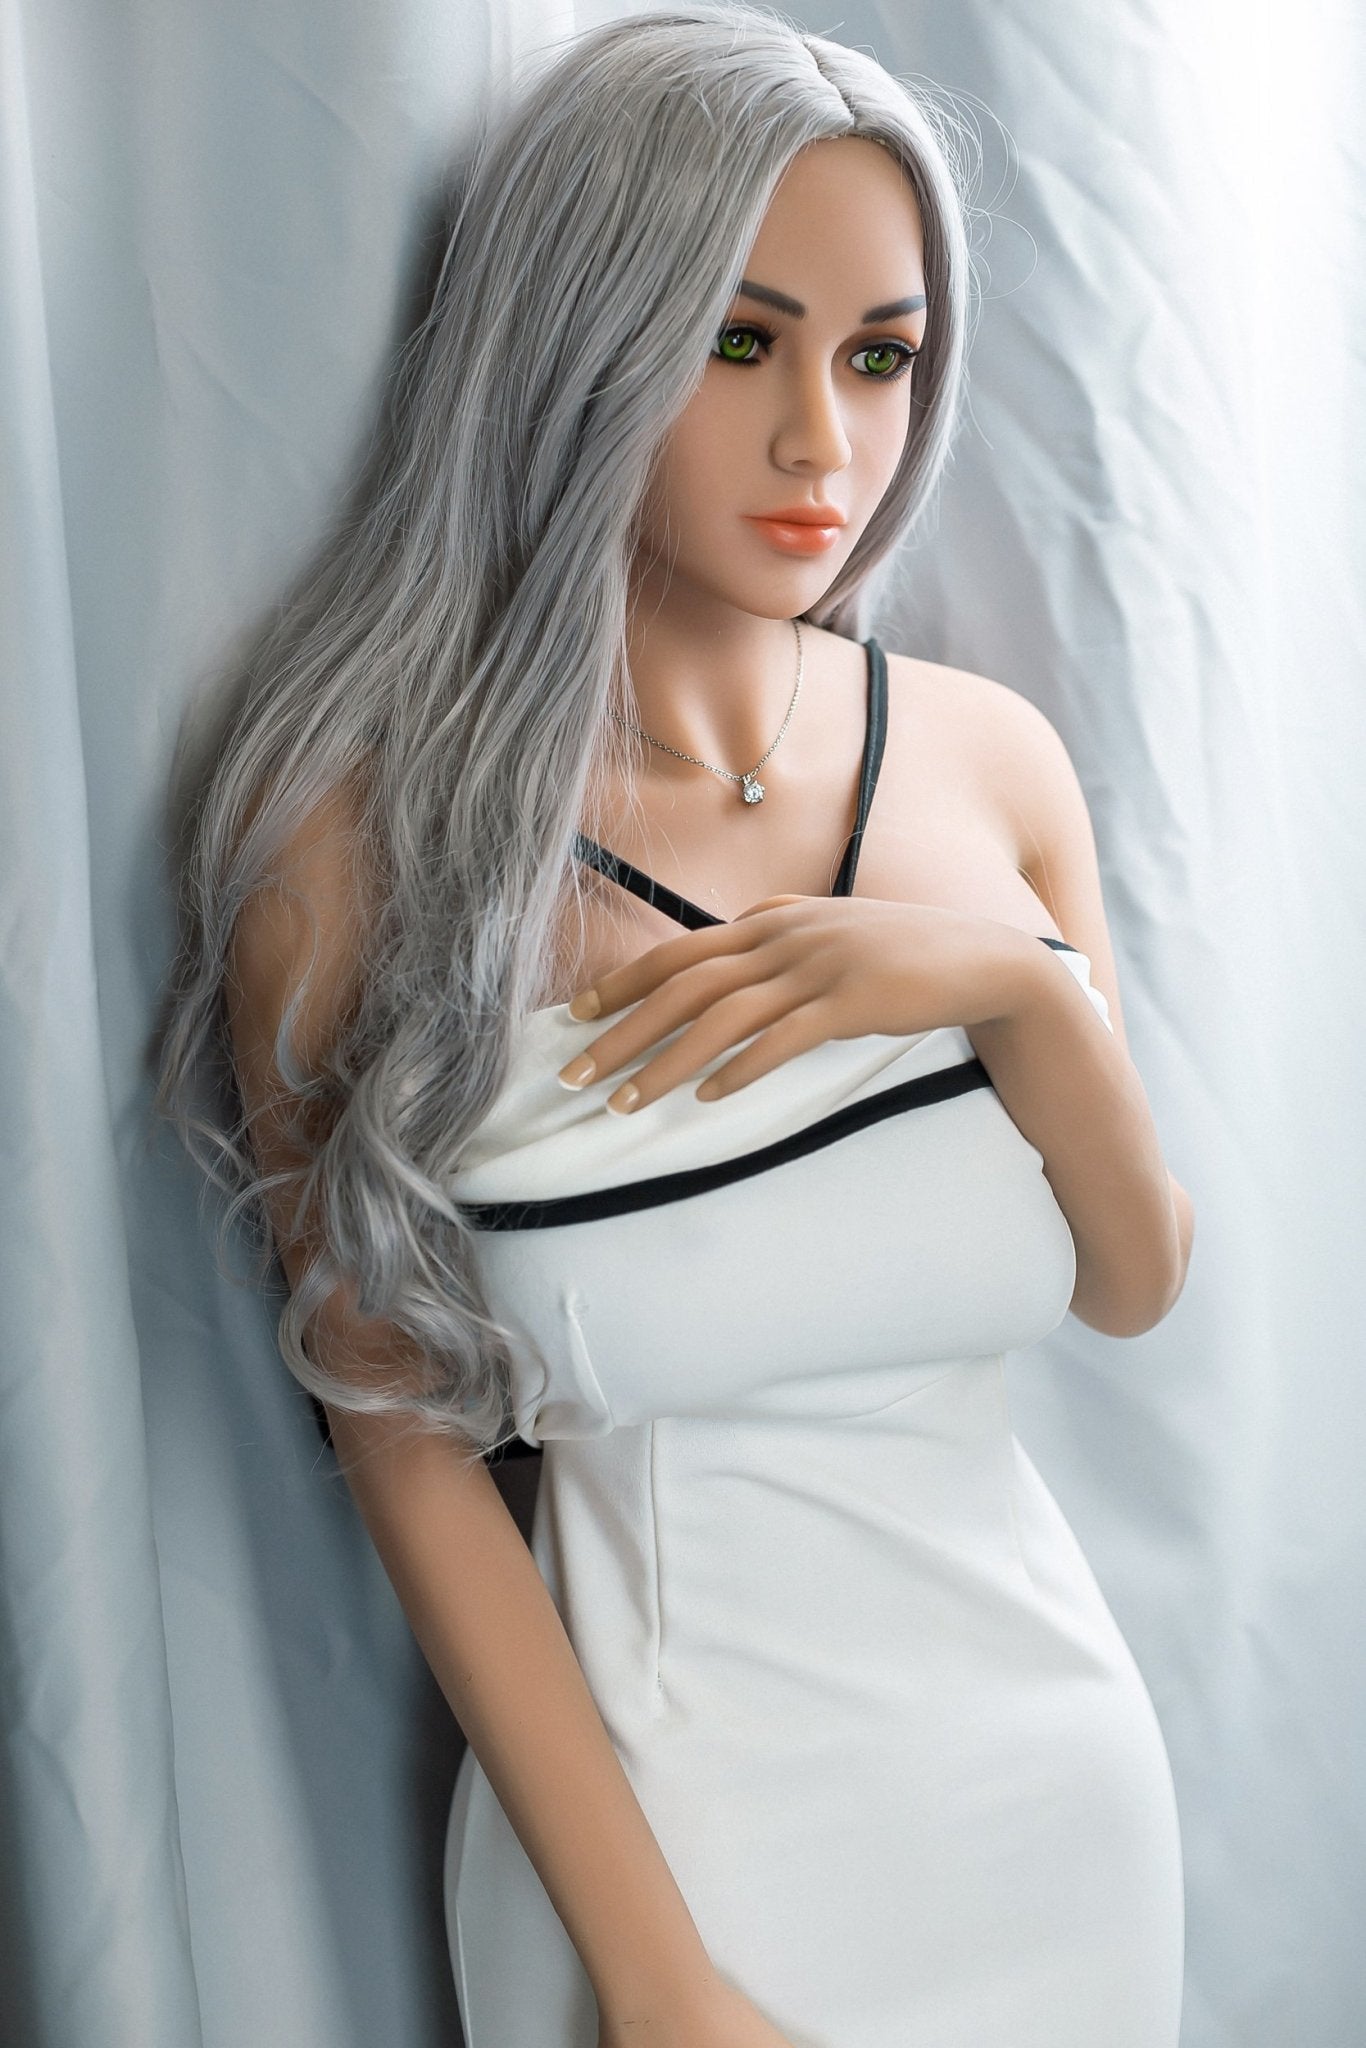 Britney - Real TPE Silicone Sex Doll Huge Breasts -TPE Sex Doll by Anmodolls